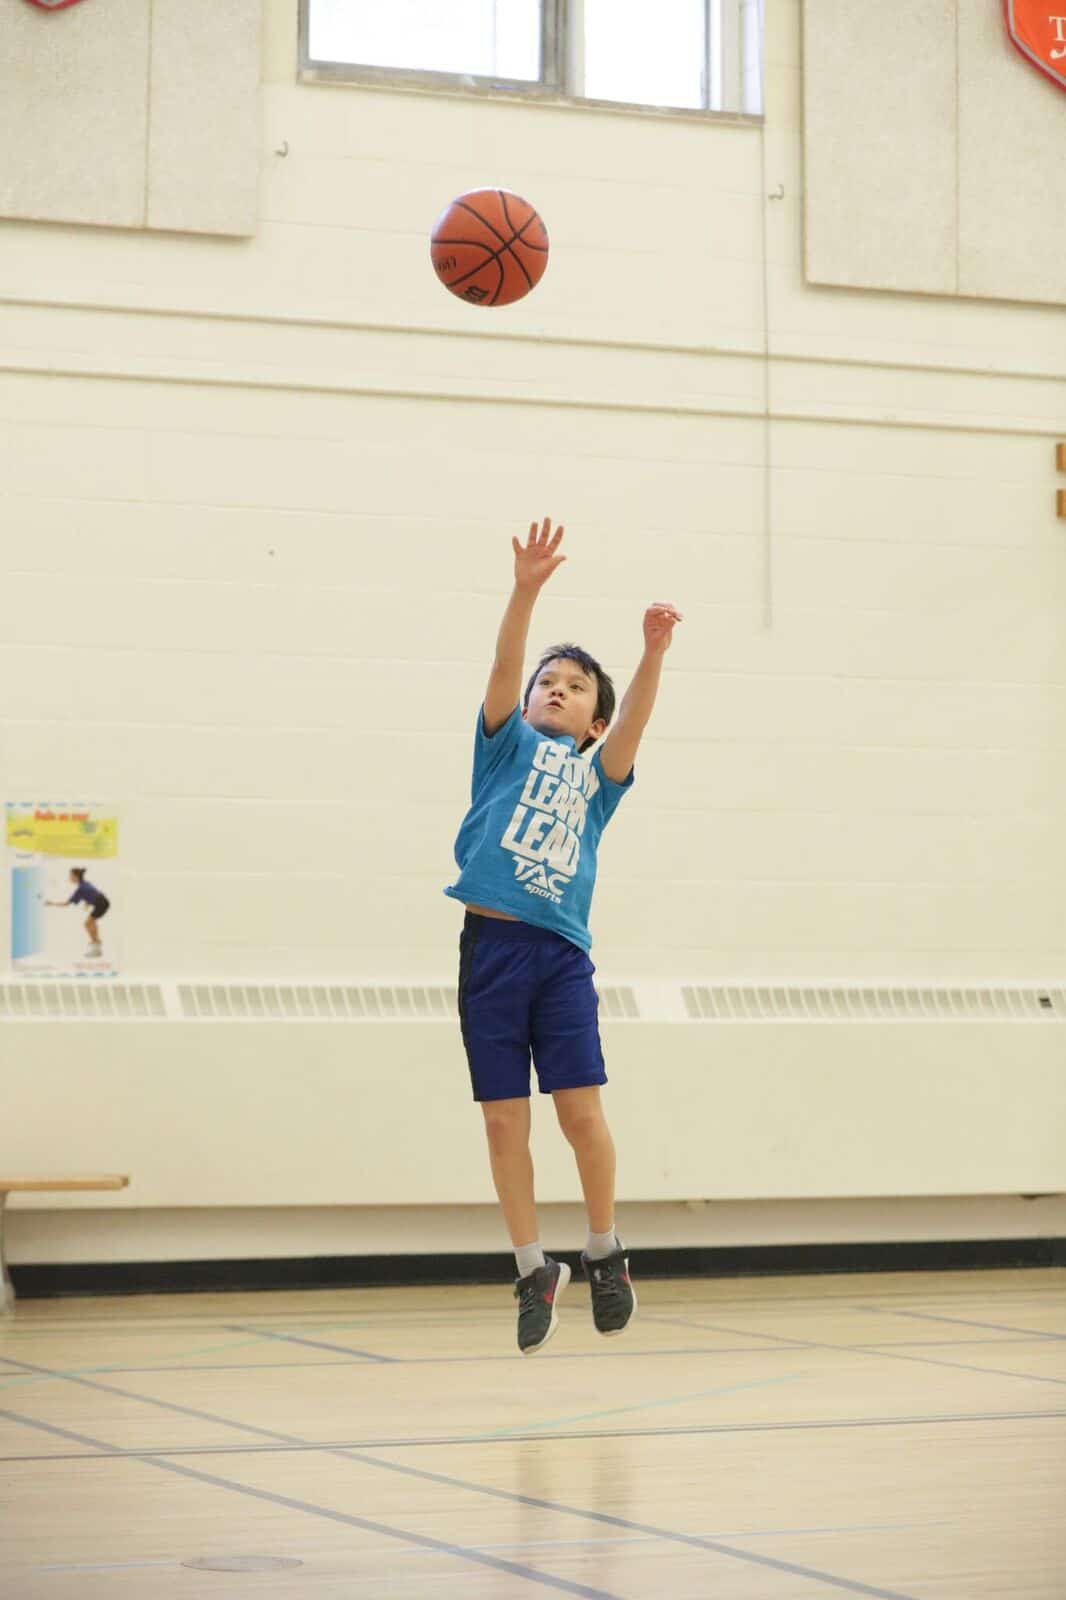 8 Valuable Life Lessons Kids Learn From Playing Basketball